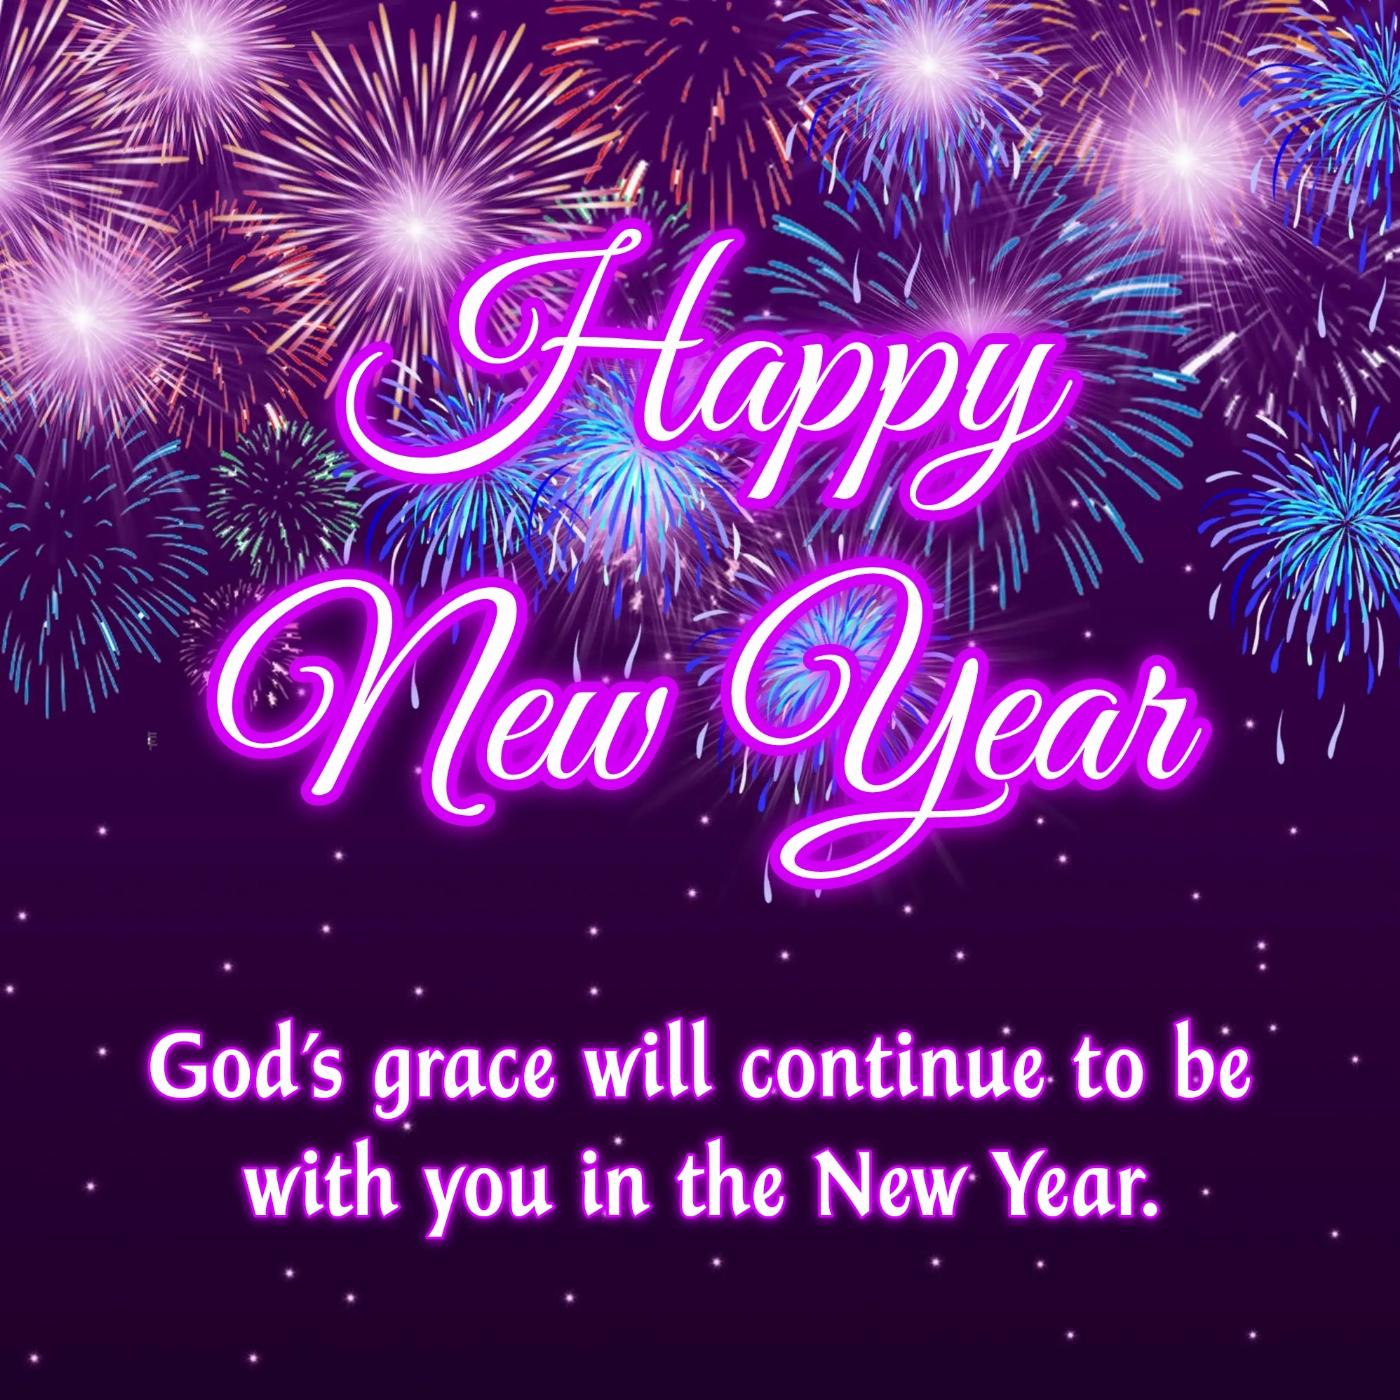 Gods grace will continue to be with you in the New Year